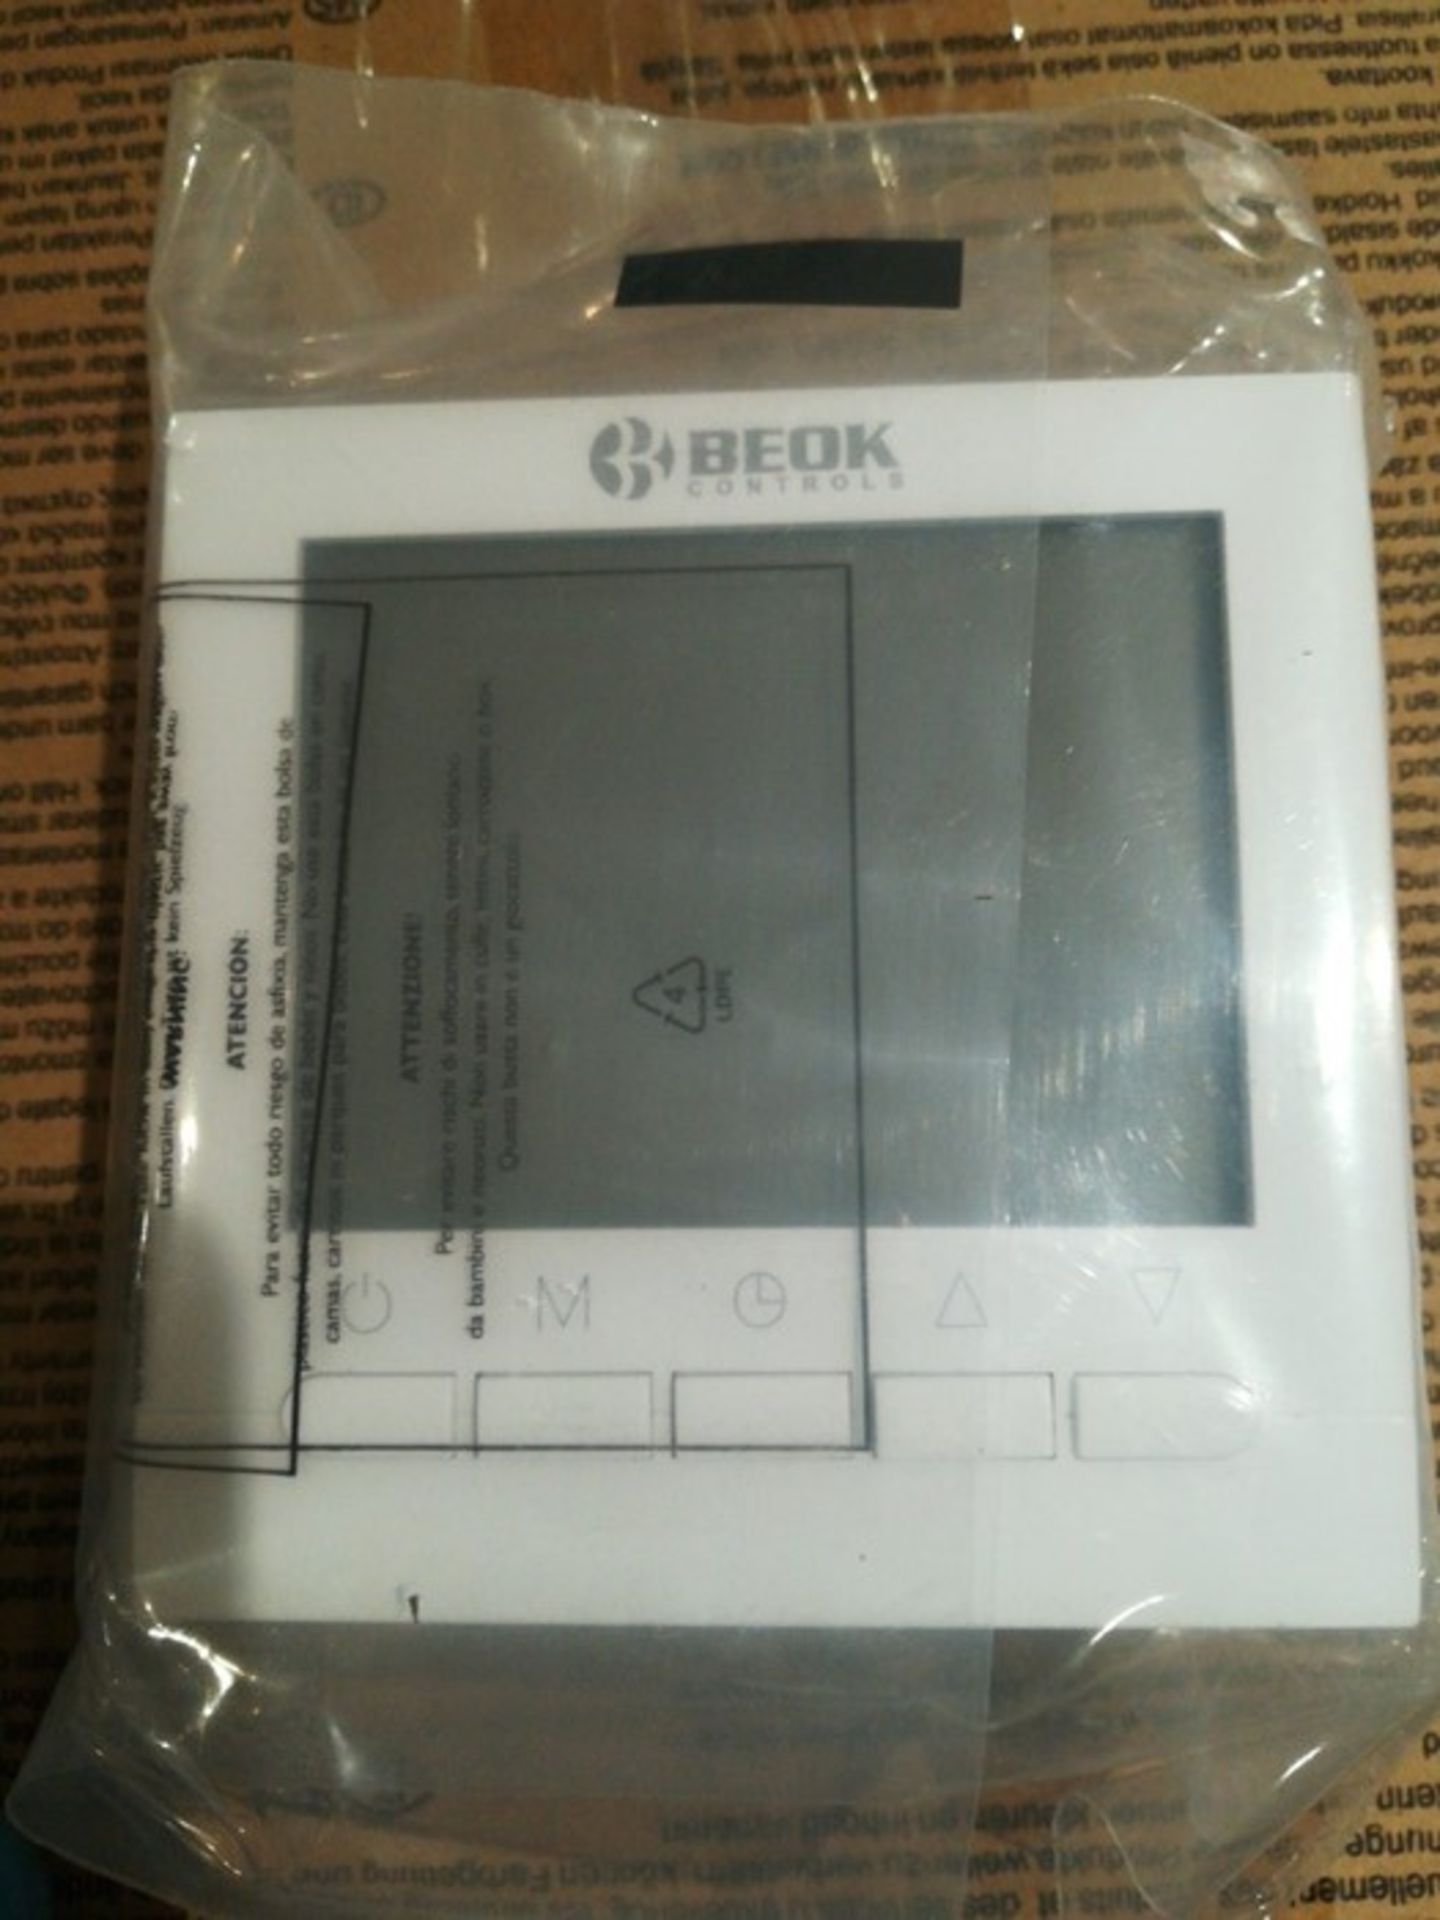 Beok BOT-313 WiFi Progammable Gas Boiler Thermostat, Easy to Program LCD Touchscreen W - Image 2 of 2